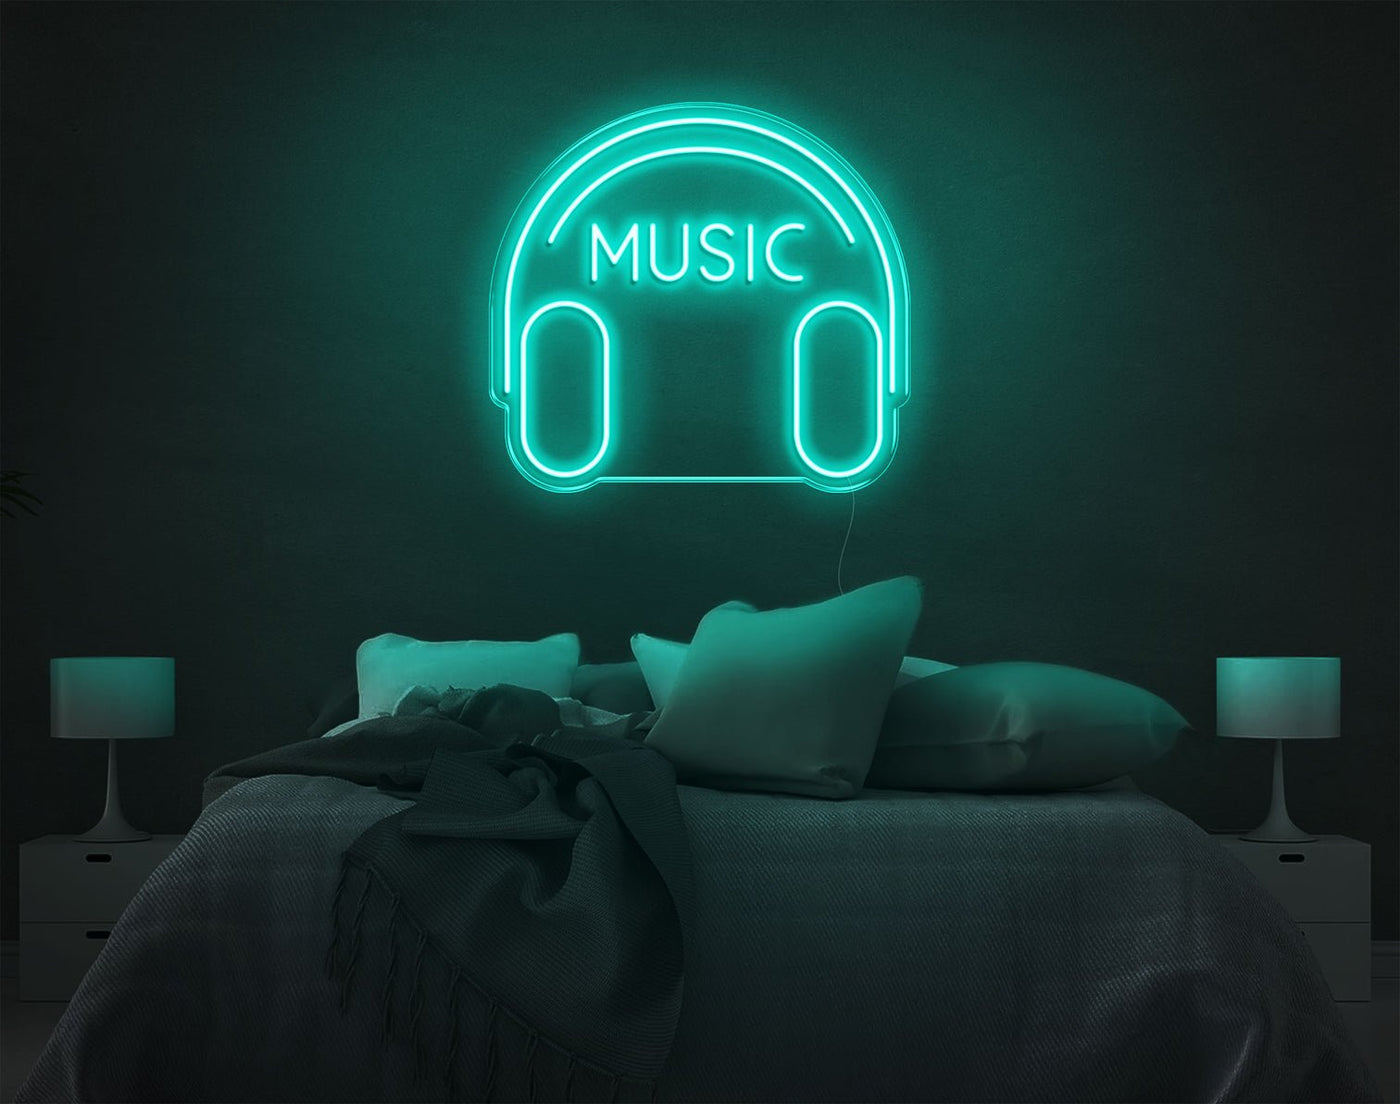 Music V2 LED Neon Sign - 19inch x 20inchTurquoise